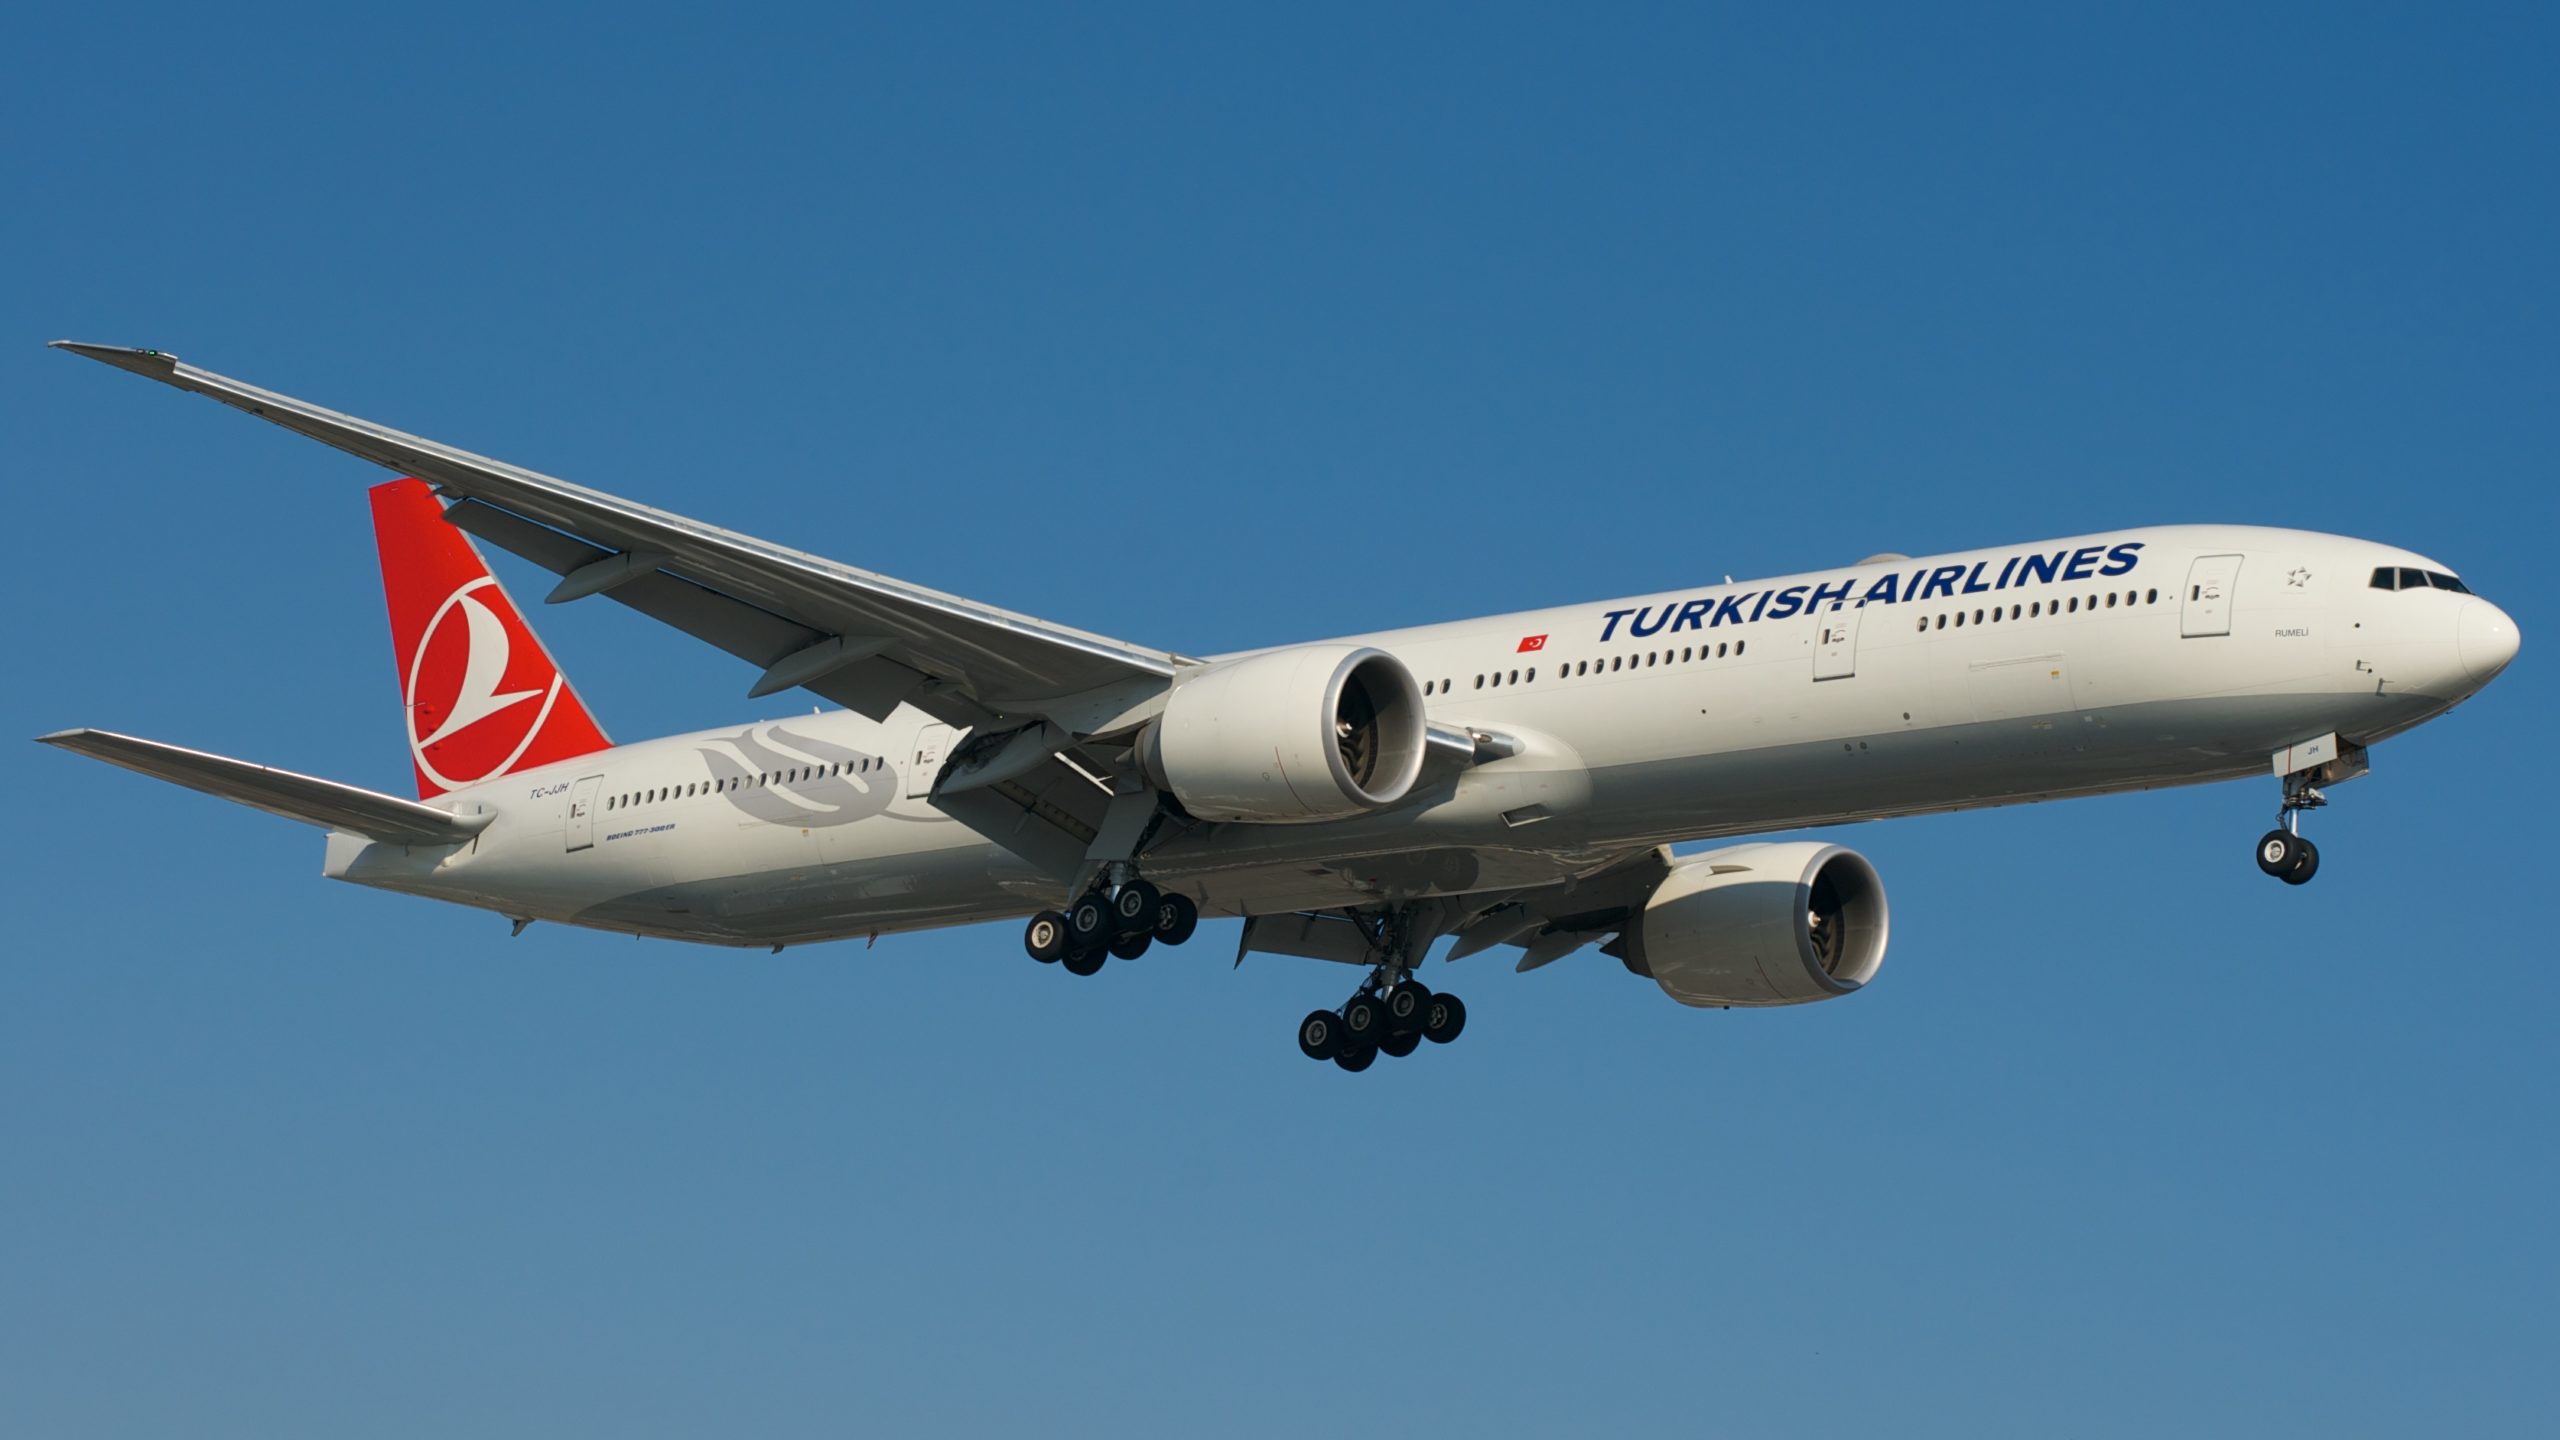 A Turkish Airlines Boeing on final approach to land.